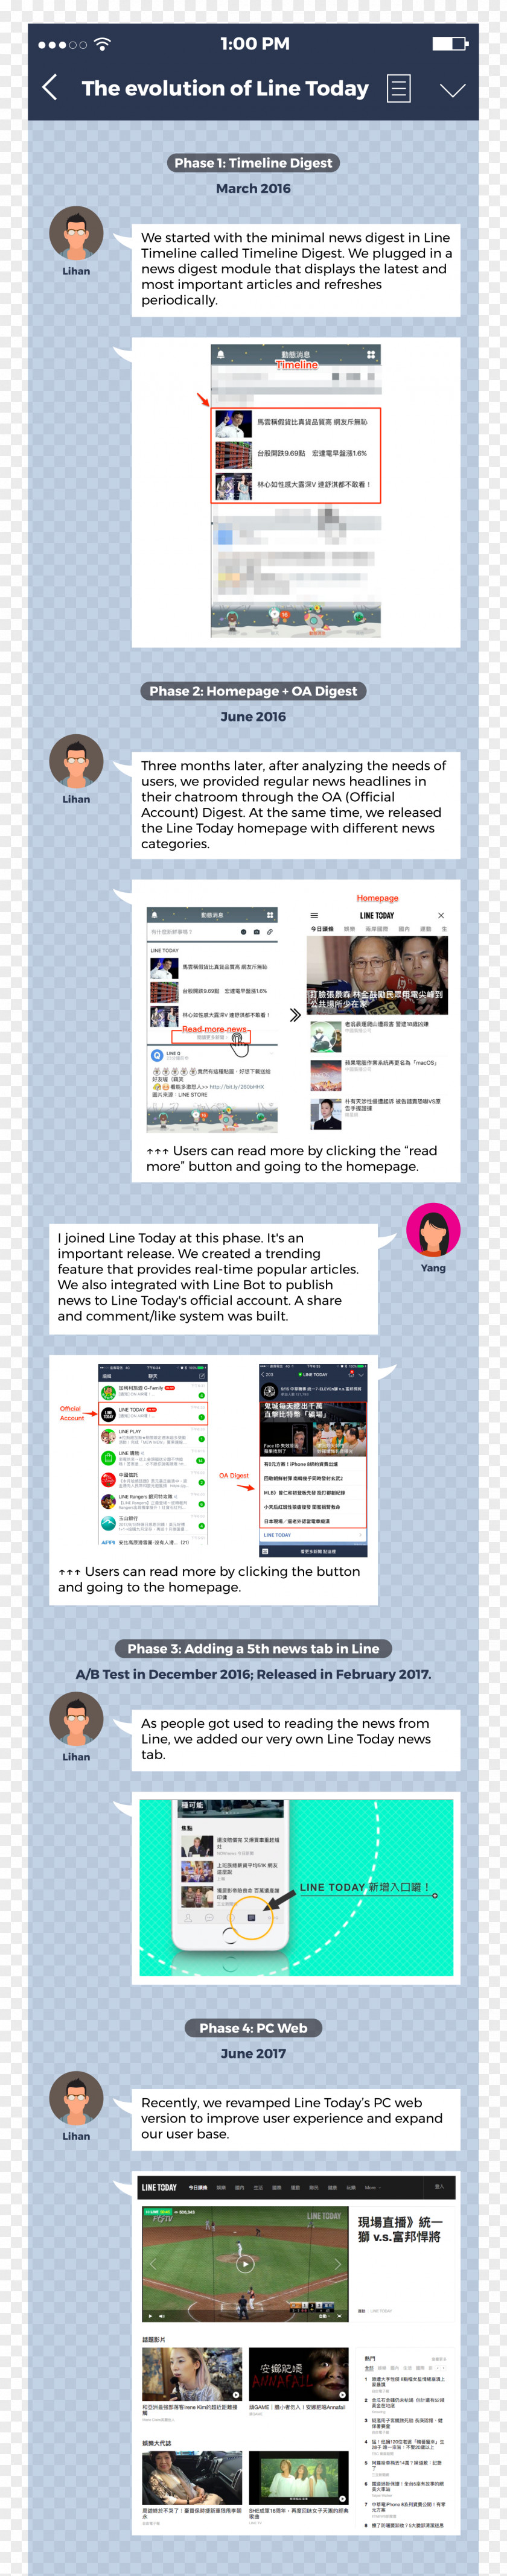 Timeline Line Web Page Engineering KKday Taiwan PNG